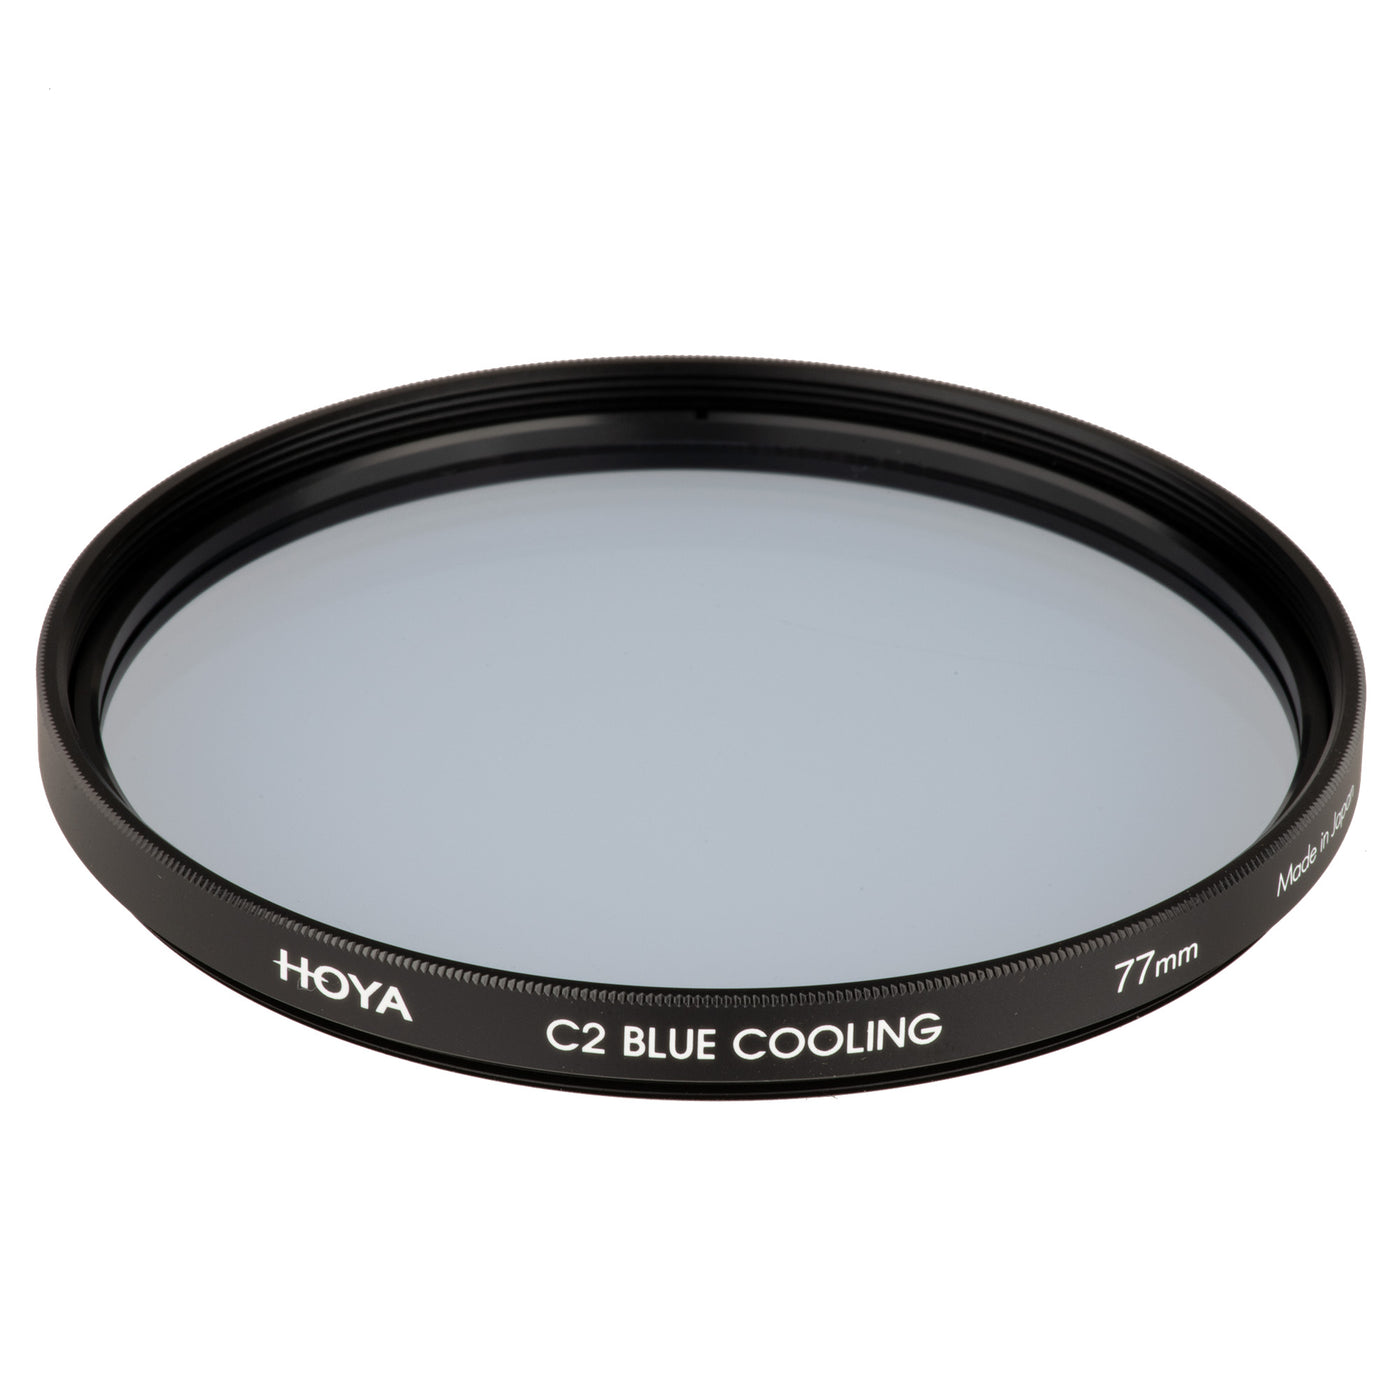 C2 Blue Cooling Color Correction